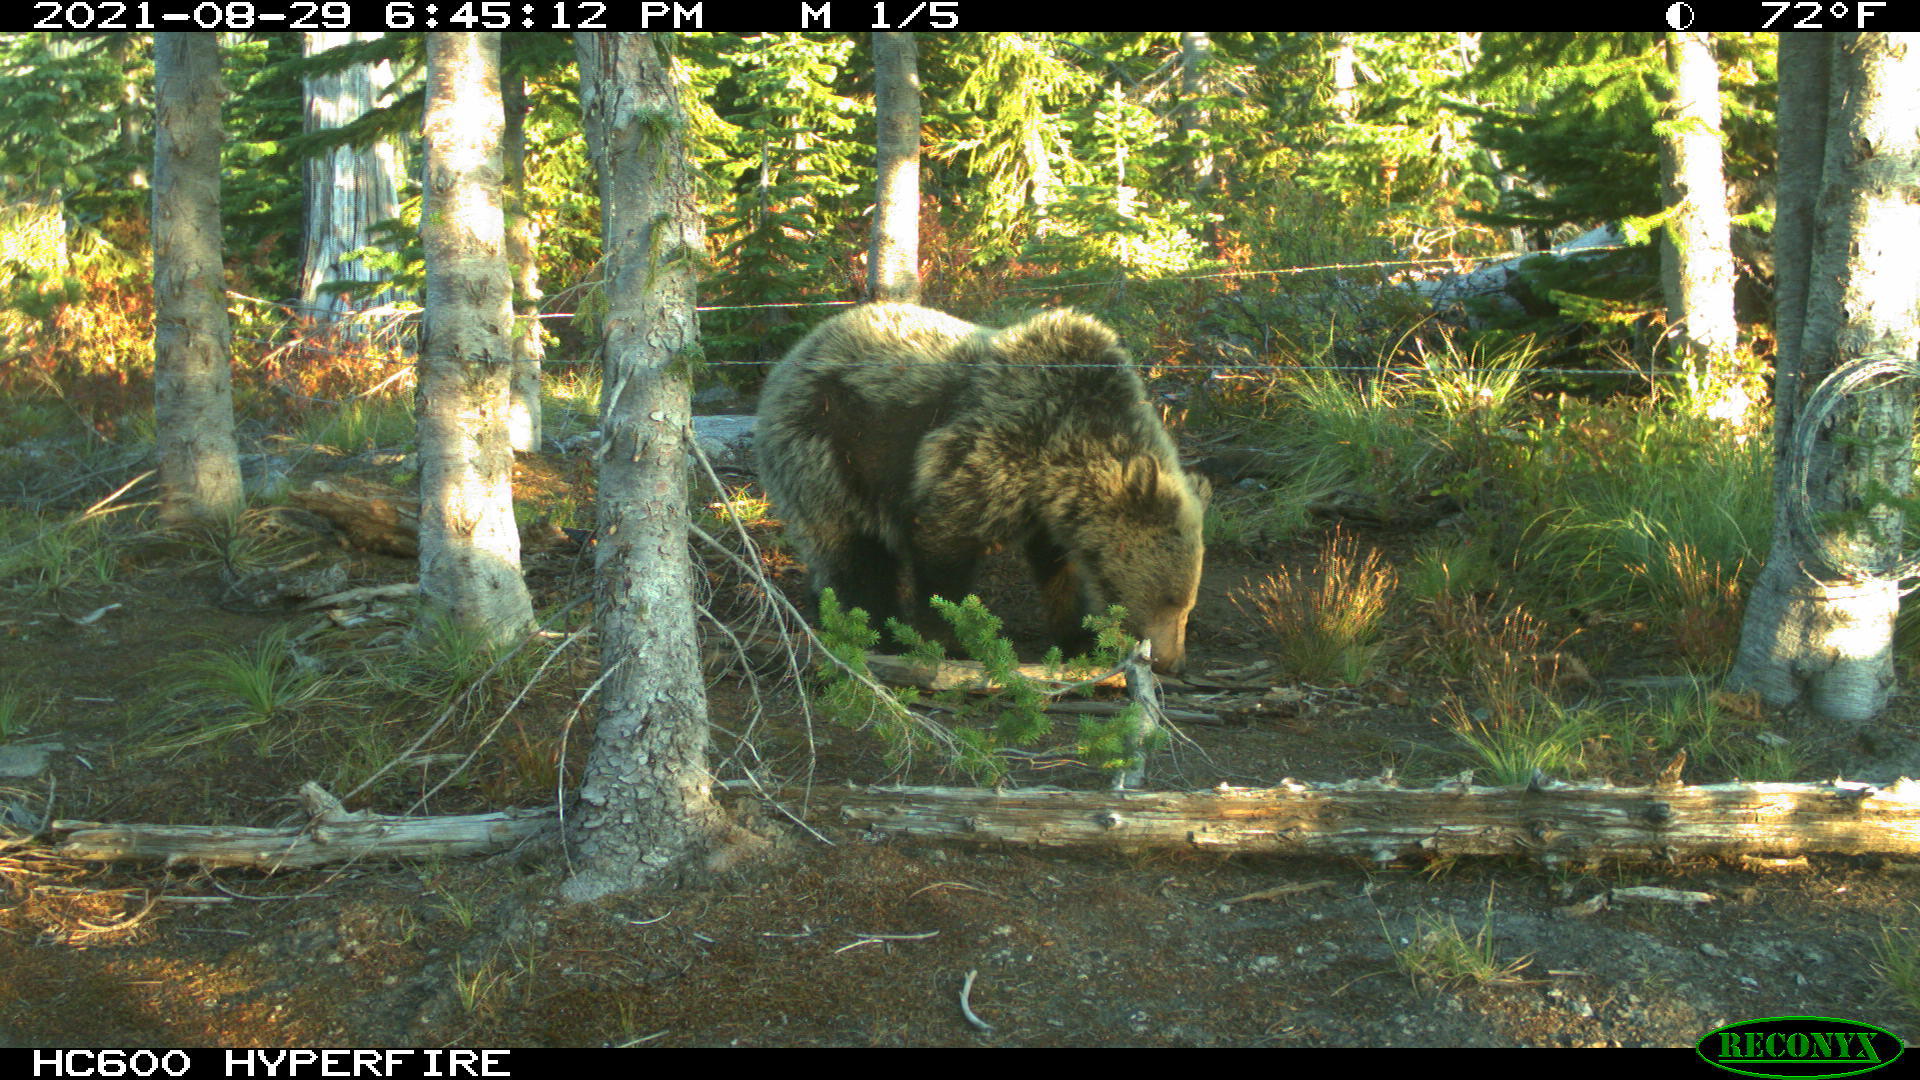 Stock photo of a grizzly bear in the Panhandle Region